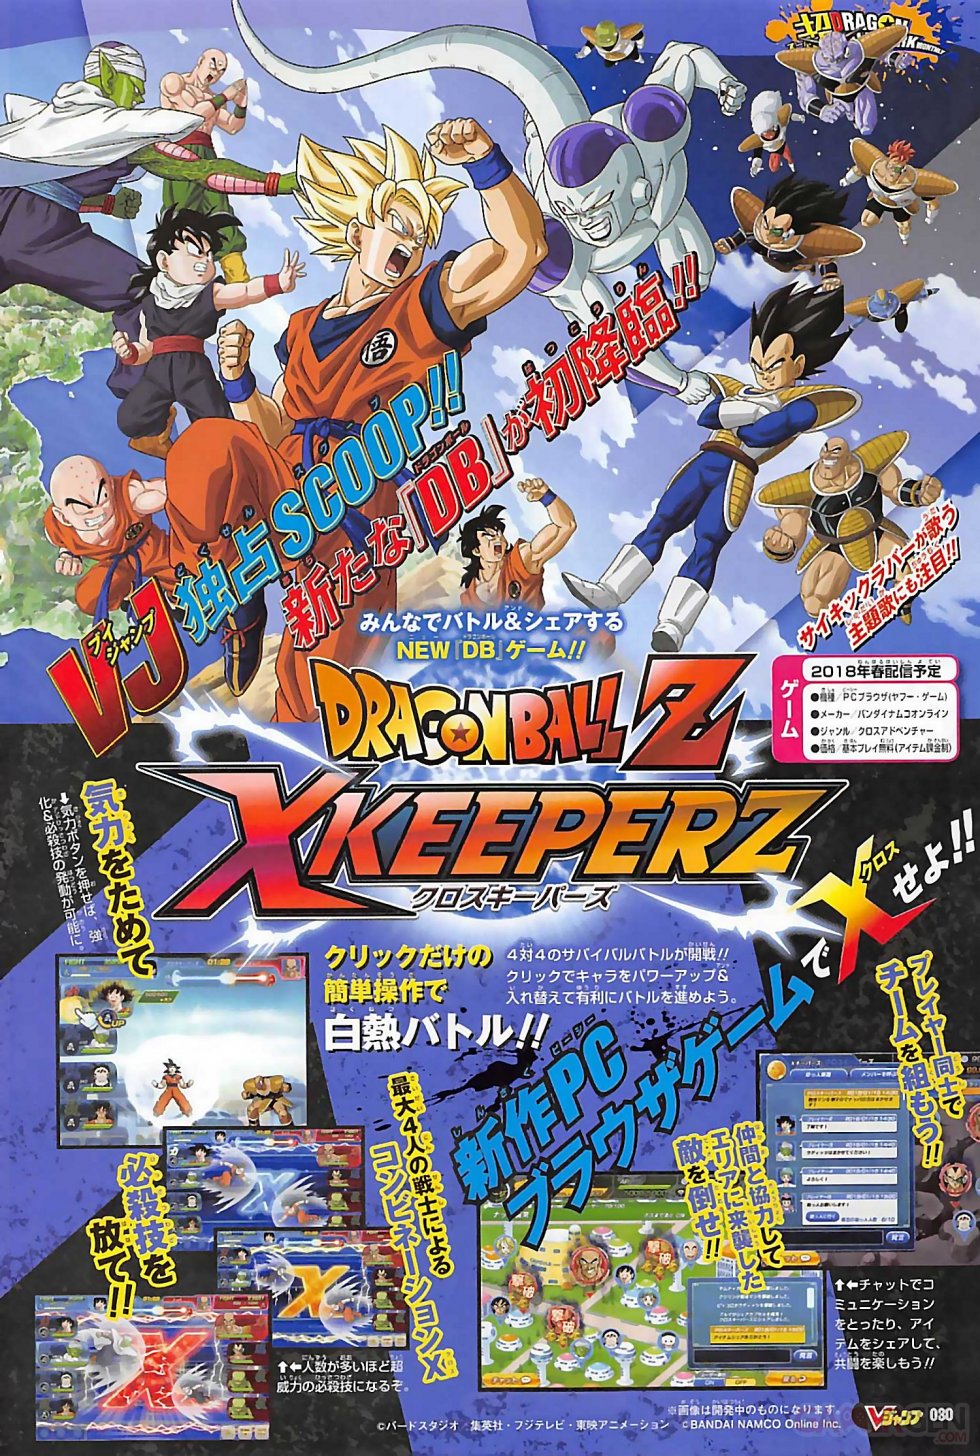 Dragon Ball Z X Keeperz images (1)